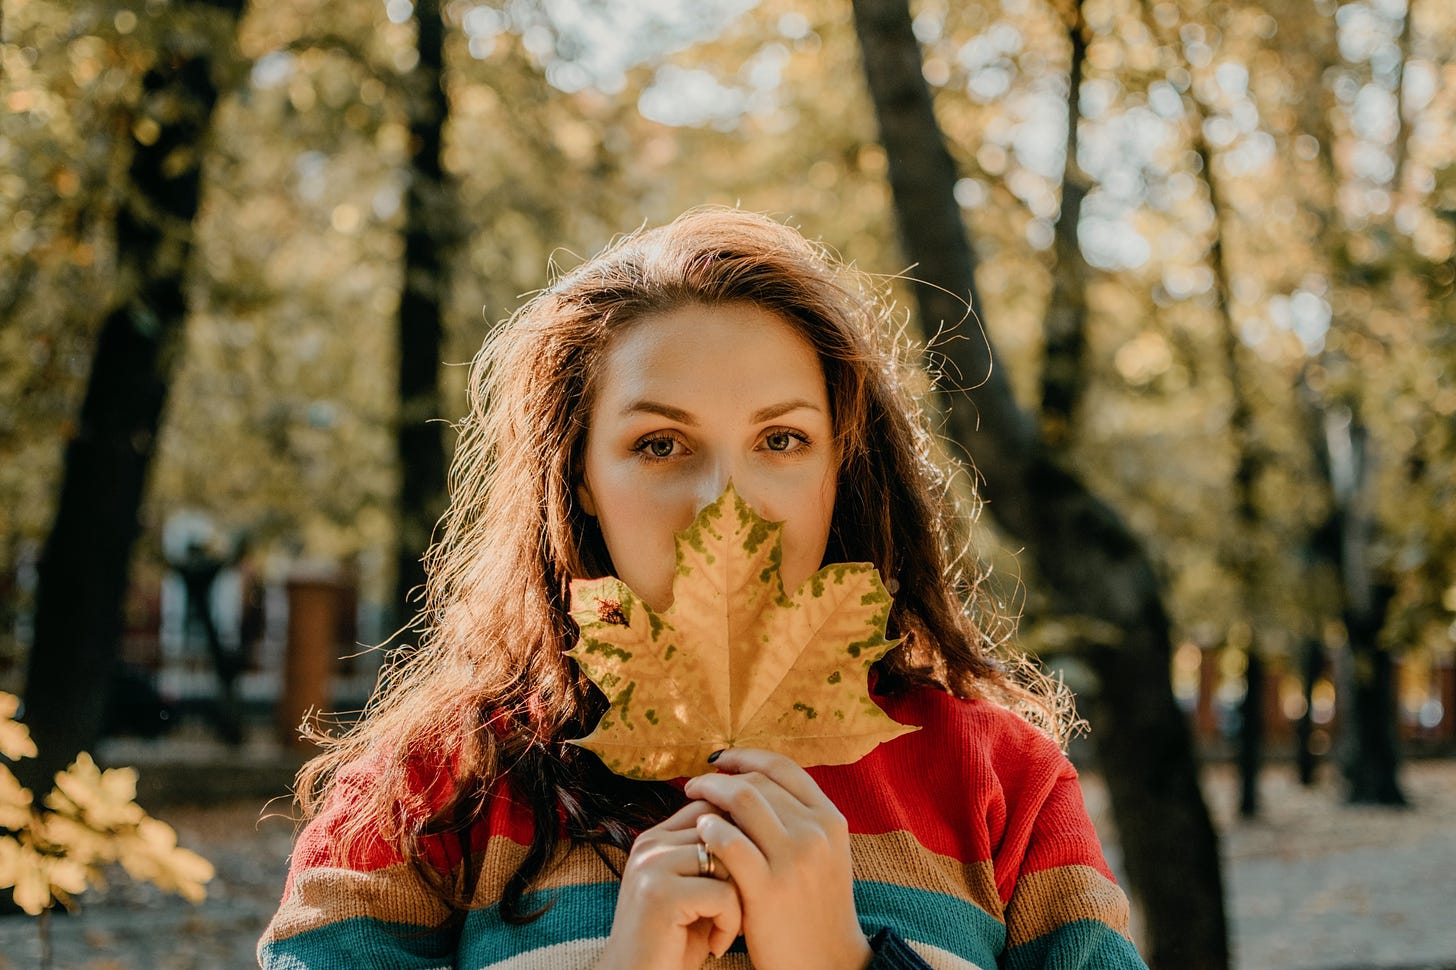 A woman conceals her face behind a large, yellowing leaf in an autumn park.